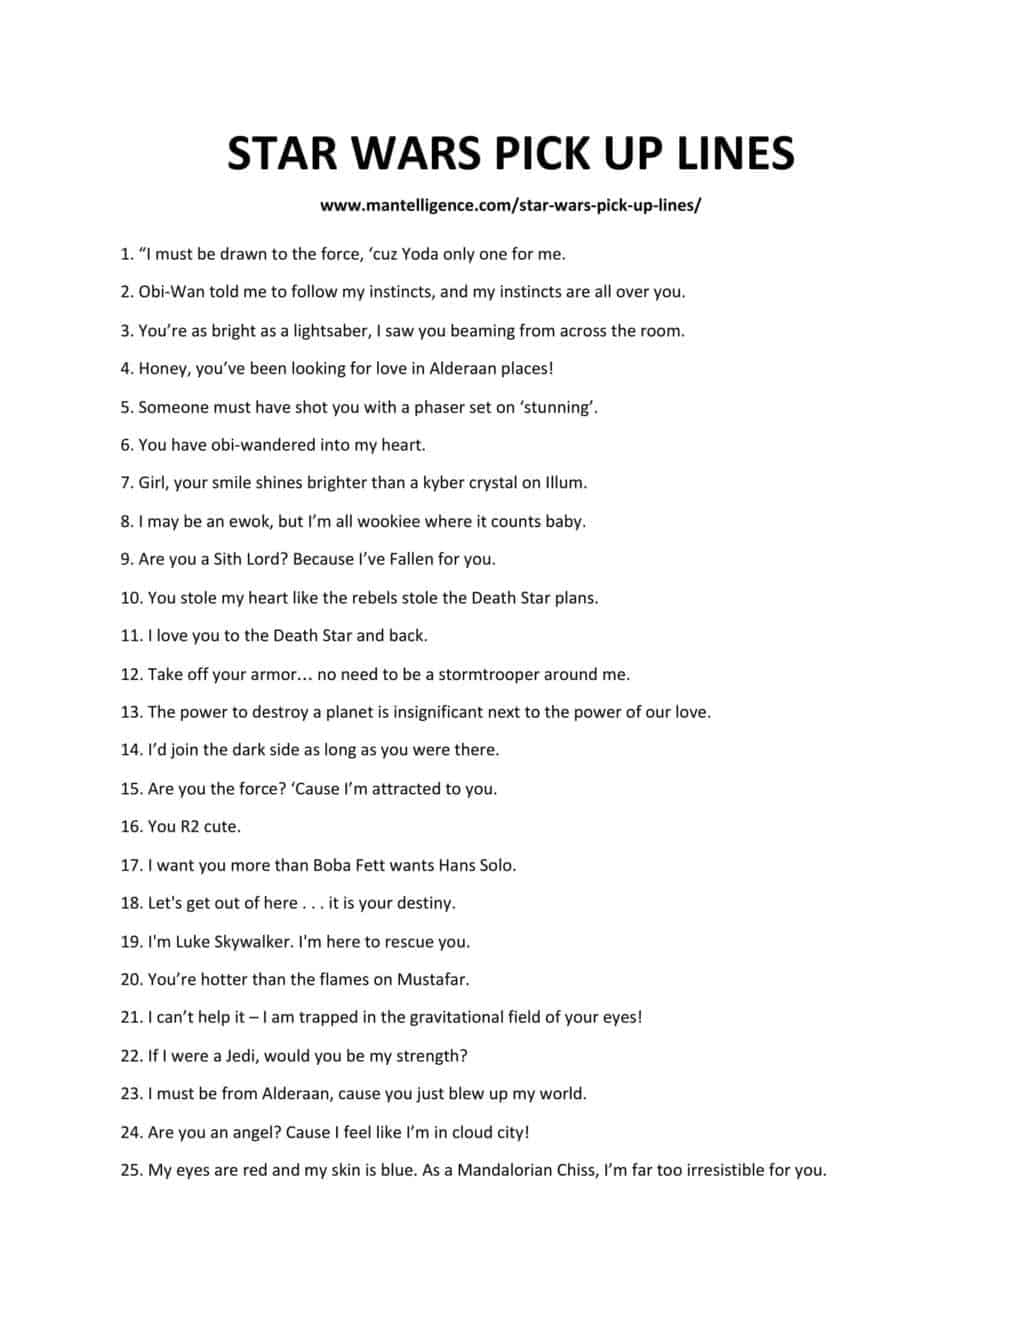 41 Awesome Star Wars Pick Up Lines - Epic And Daring, Get Her Attention